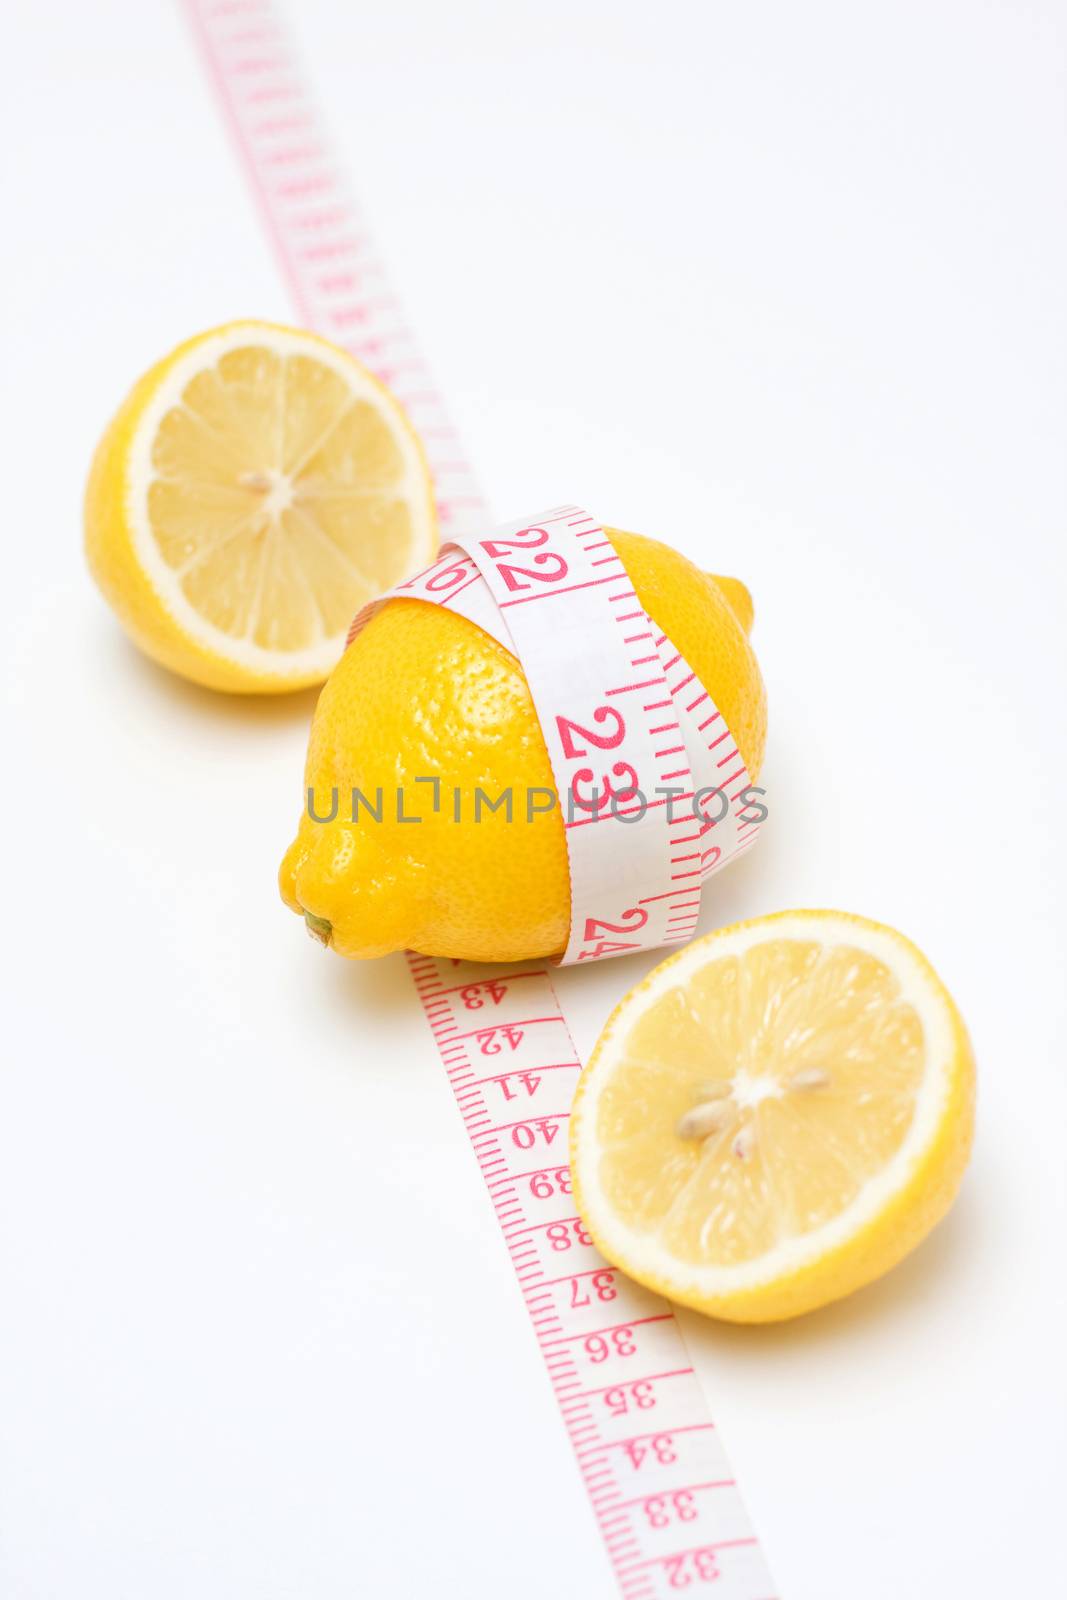 Lemon and Tape measures isolated on white background by myyaym